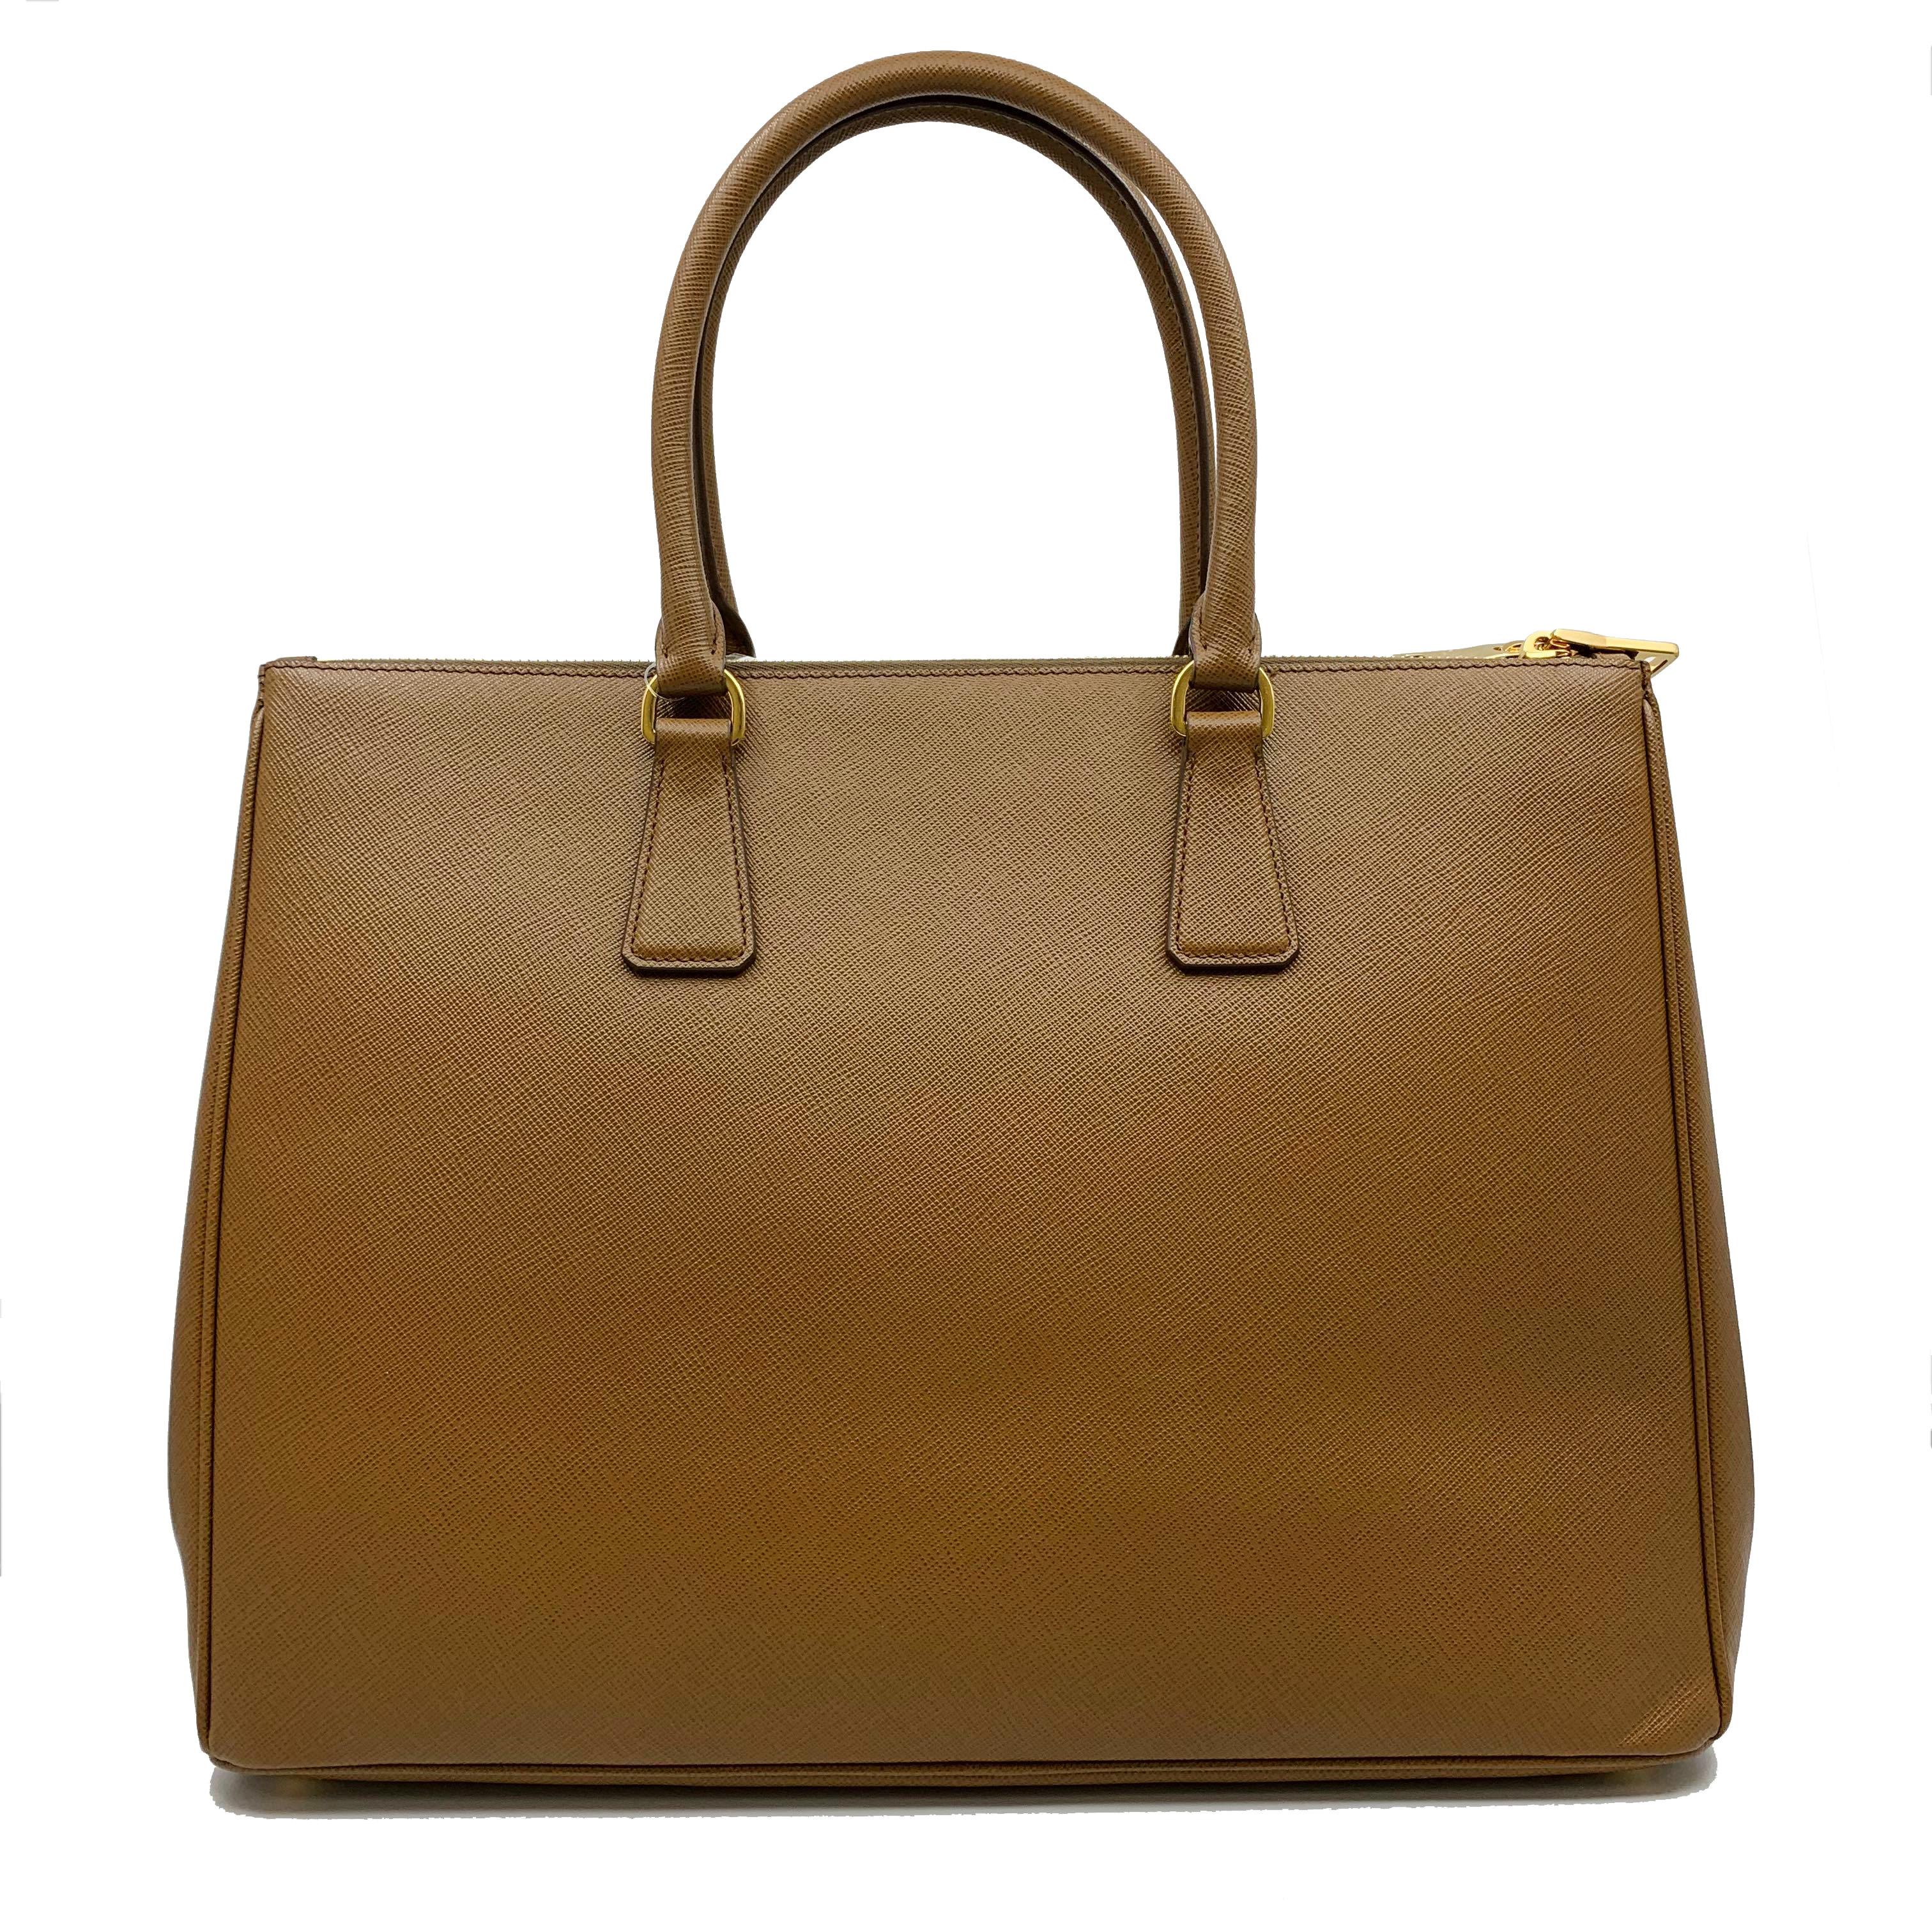 Prada's Galleria Saffiano tote is a perfectly prim addition to your accessories edit. Crafted from textured brown calf leather, this design is finished with dainty top handles and golden hardware. Double storage compartments leave ample room for